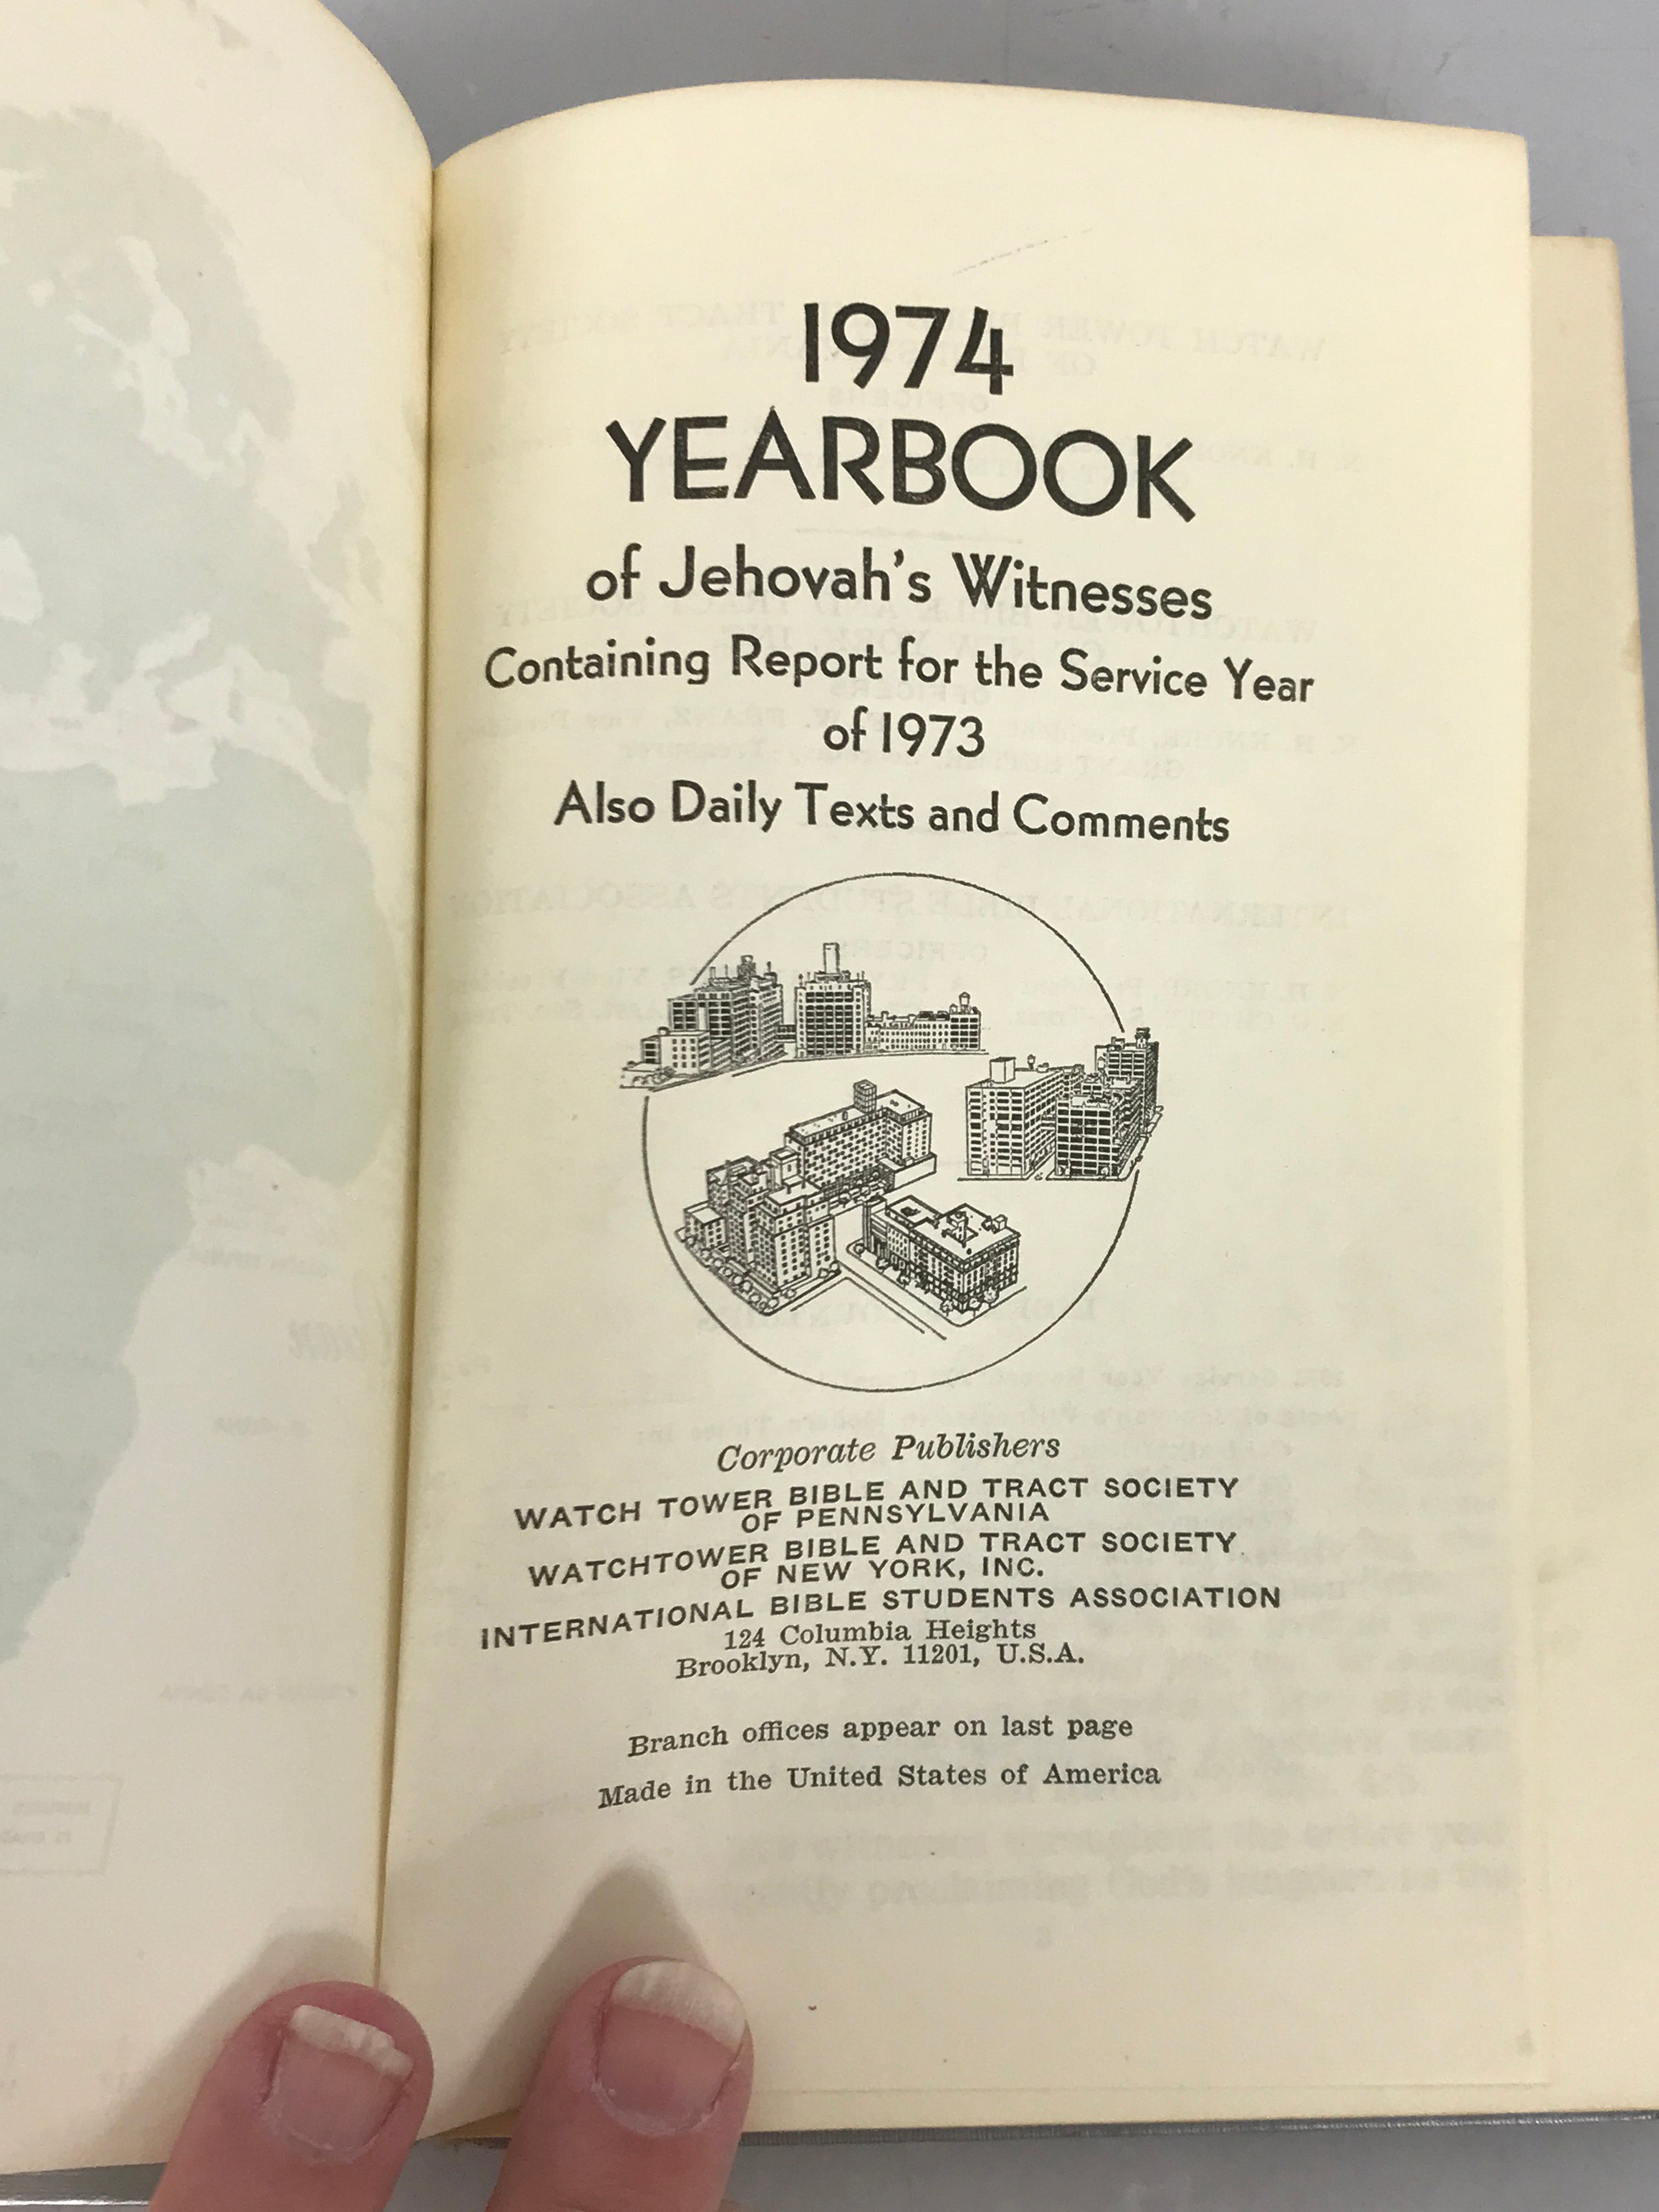 Lot of 9 Yearbook of Jehovah's Witnesses and Mystery of God Book 1966-1969, 1972, 1974-1976 HC